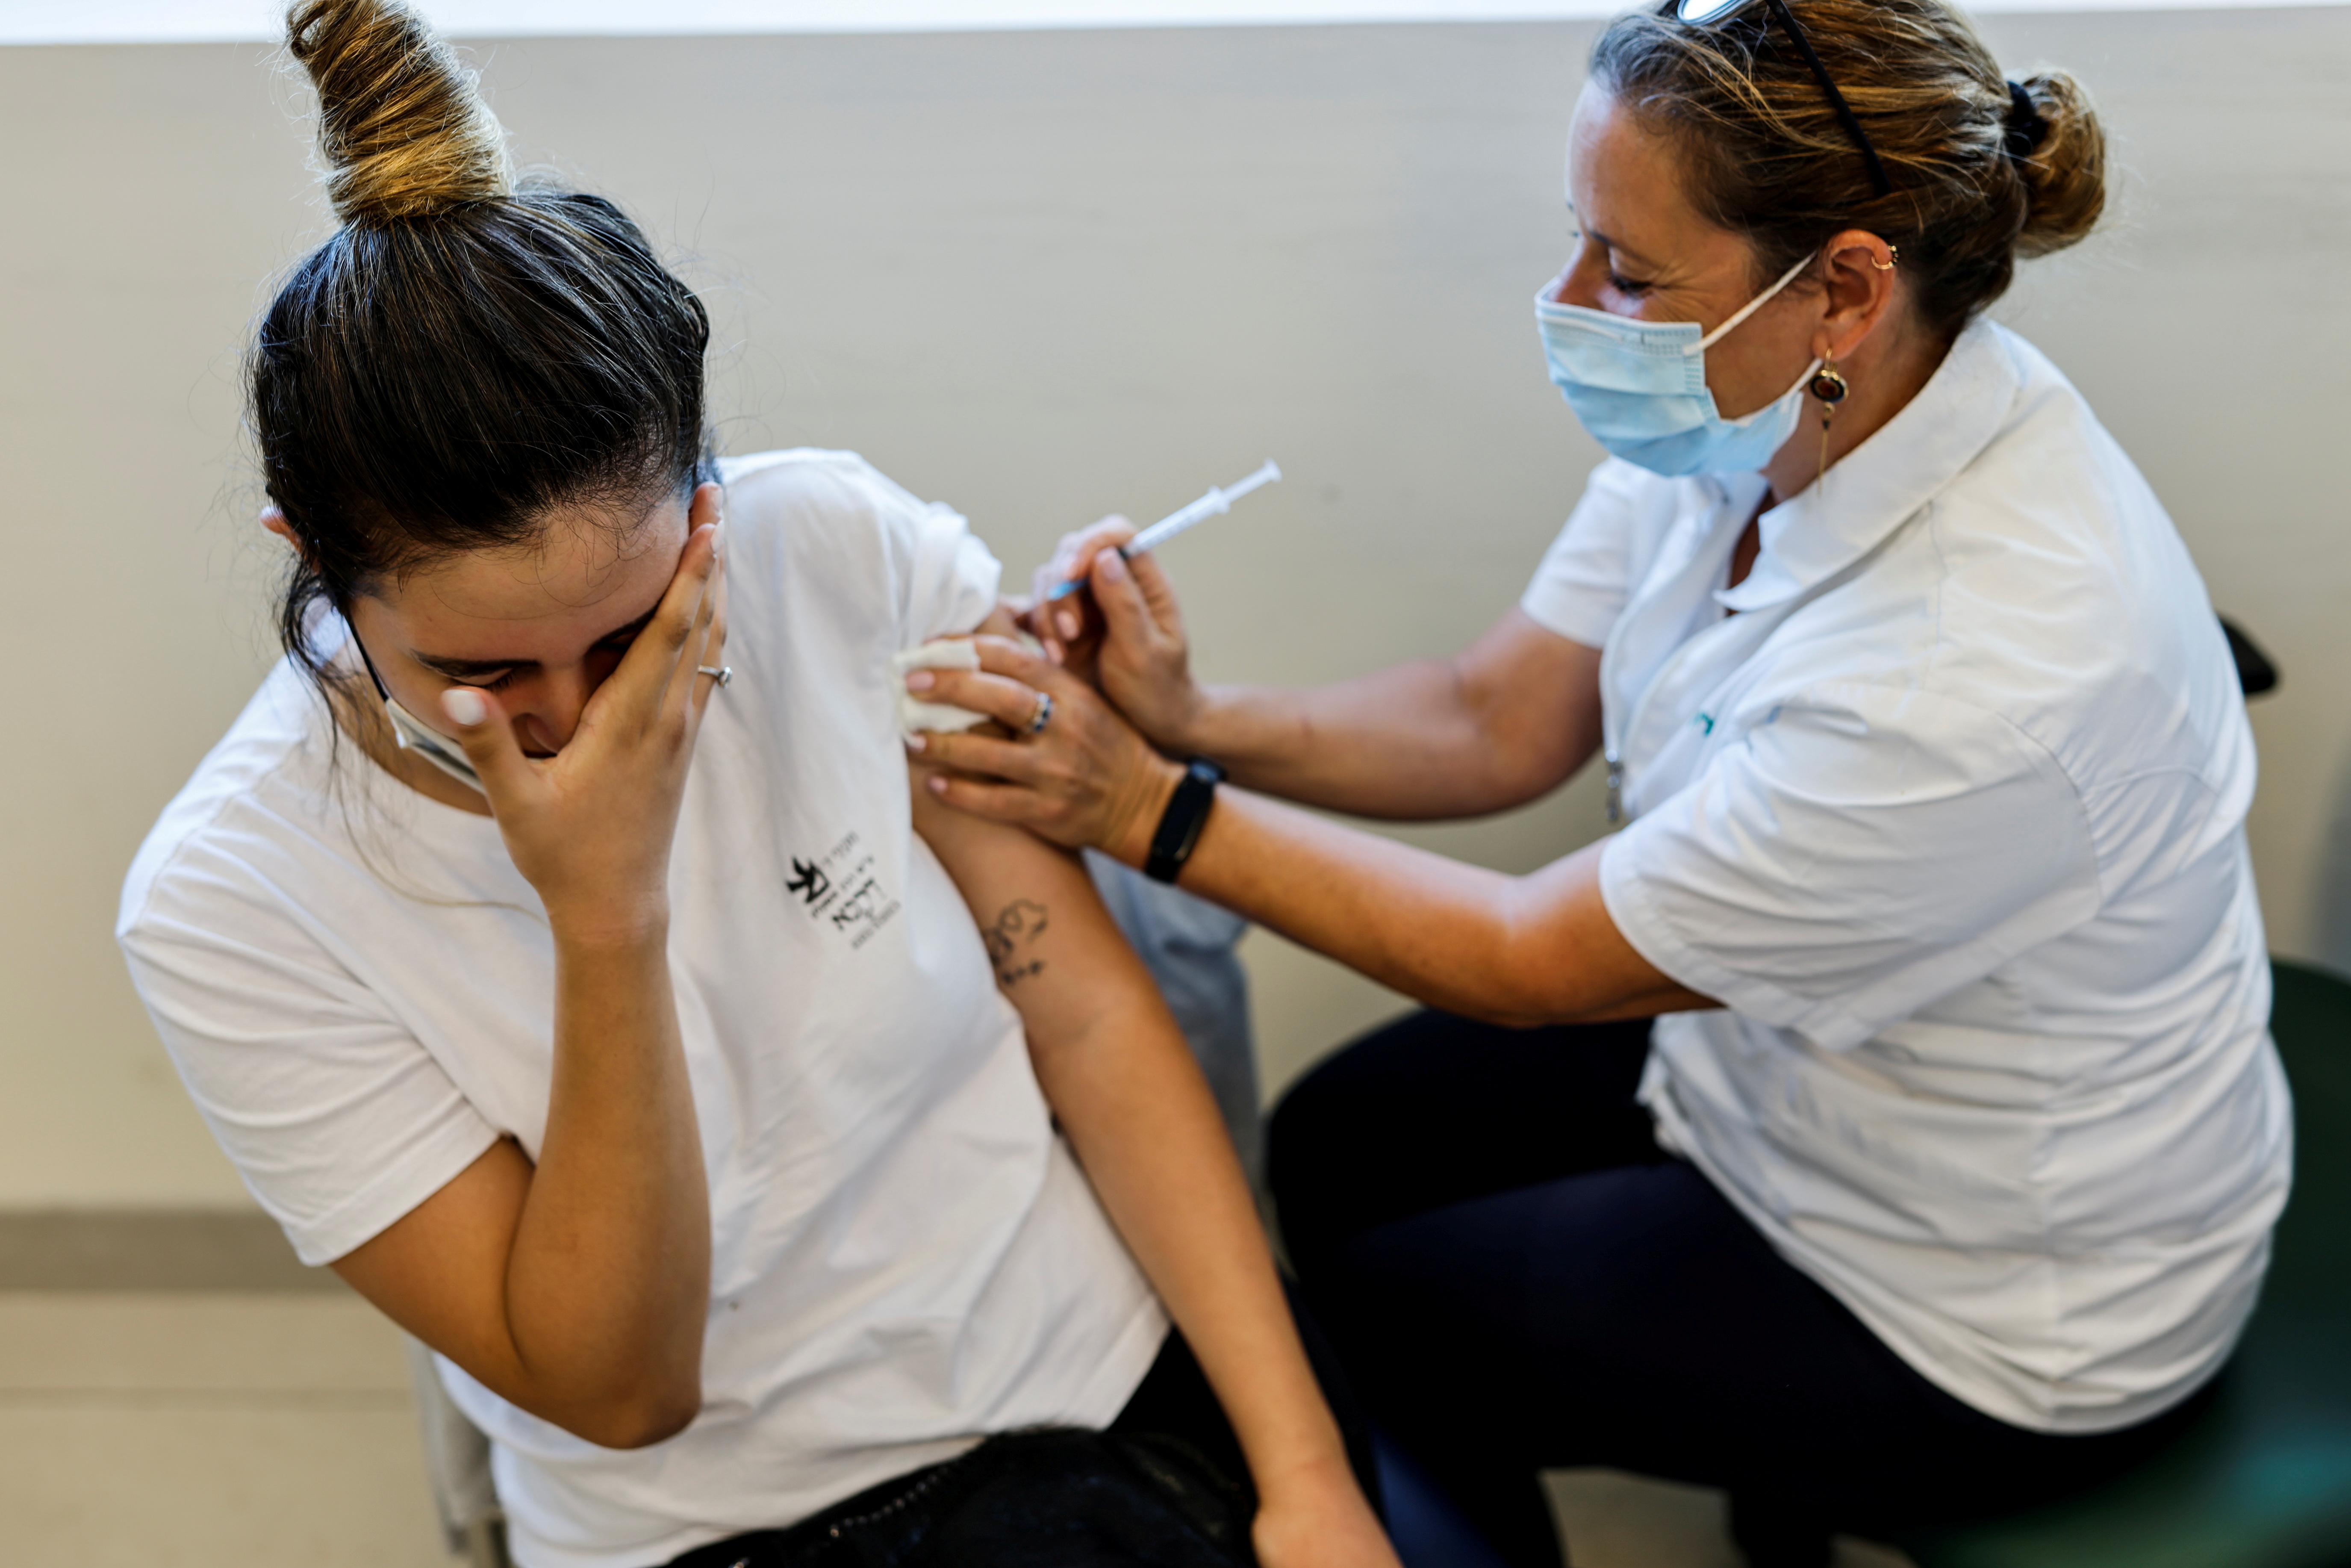 A teenager receives a dose of a vaccine against the coronavirus disease (COVID-19) after Israel approved the usage of the vaccine for youngsters aged 12-15, at a Clalit healthcare maintenance organisation in Ashkelon, Israel June 6, 2021. REUTERS/Amir Cohen/File Photo